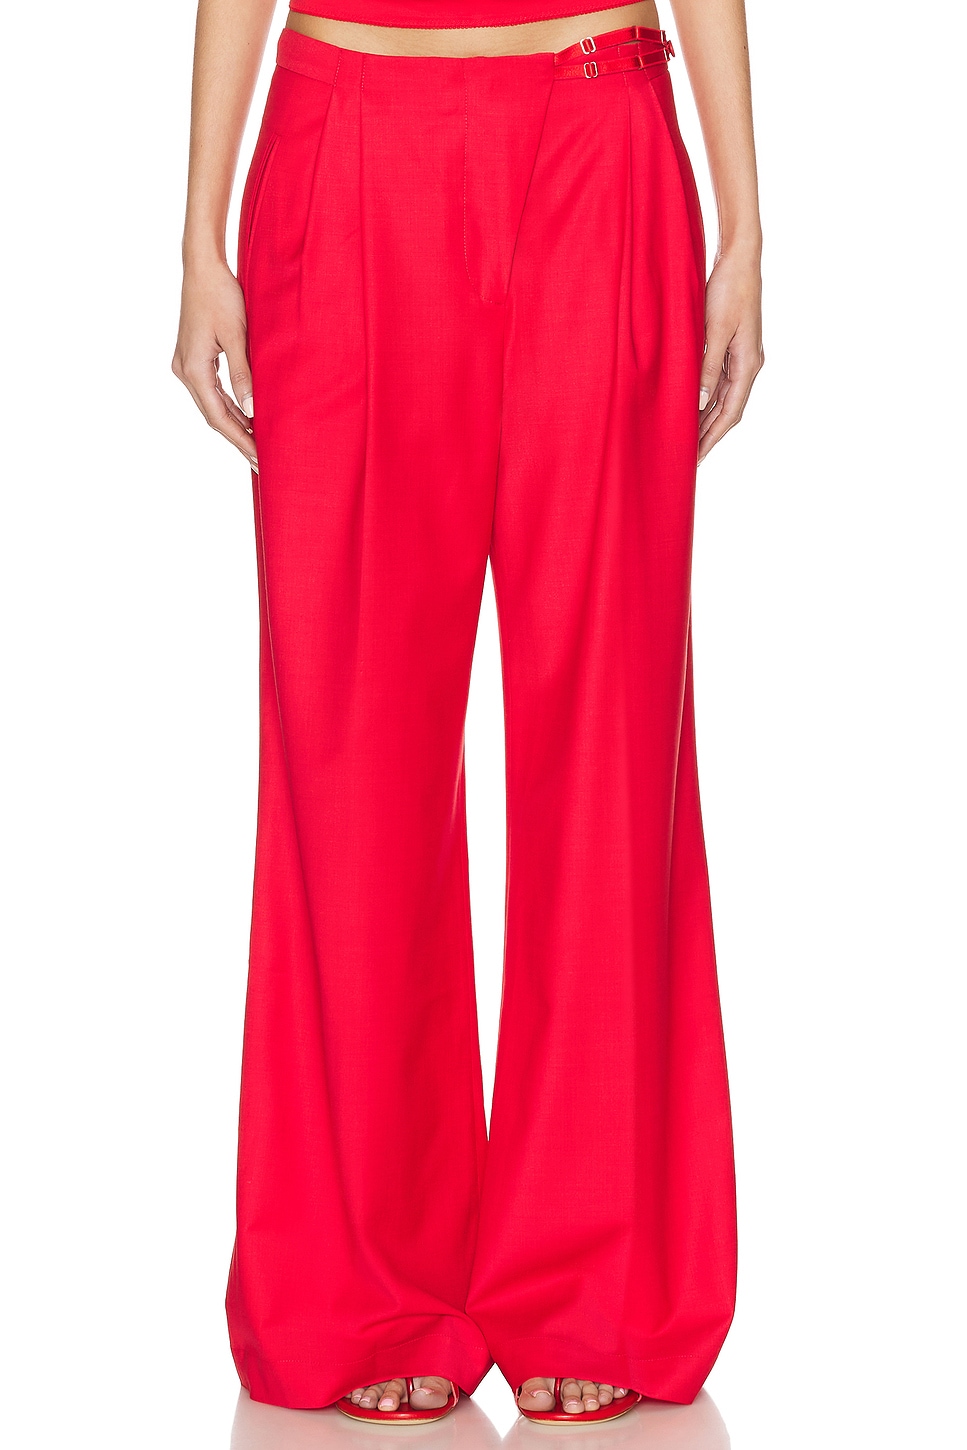 Image 1 of Anna October Noemie Pant in Red